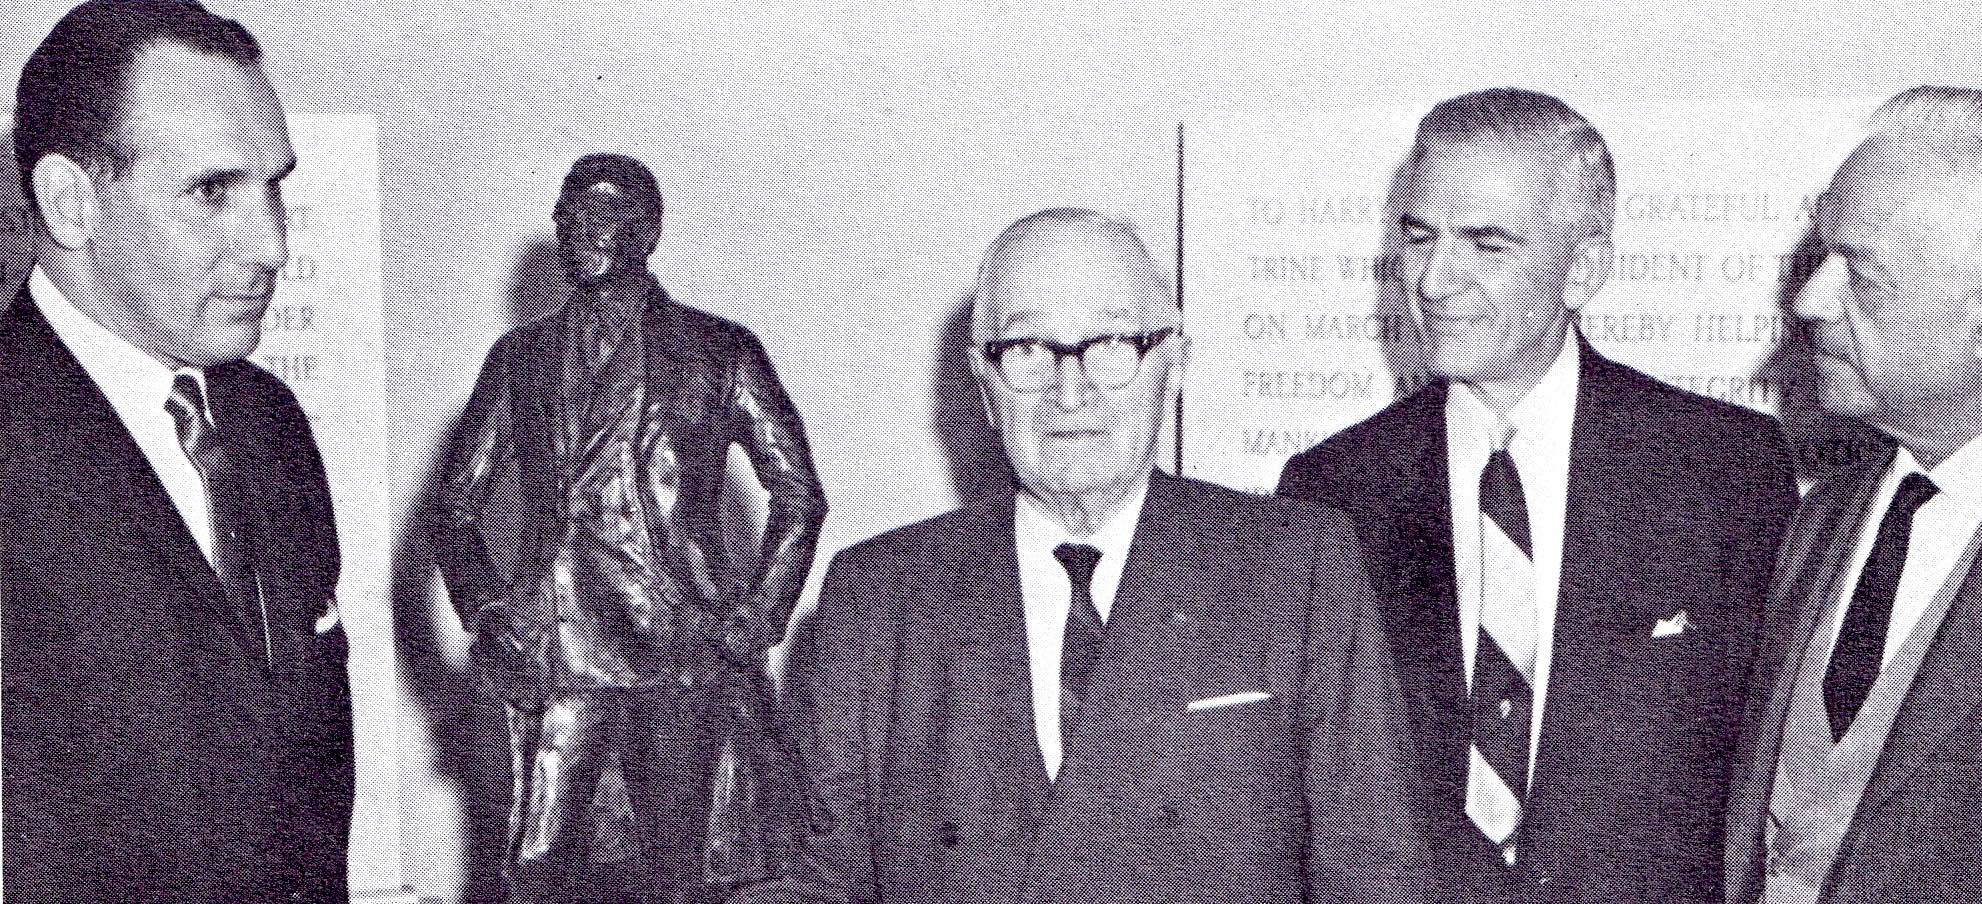 1965 - Ahepa presents a model of the Ahepa Truman Statue to President Truman and the Truman Library in Independence, Missouri.